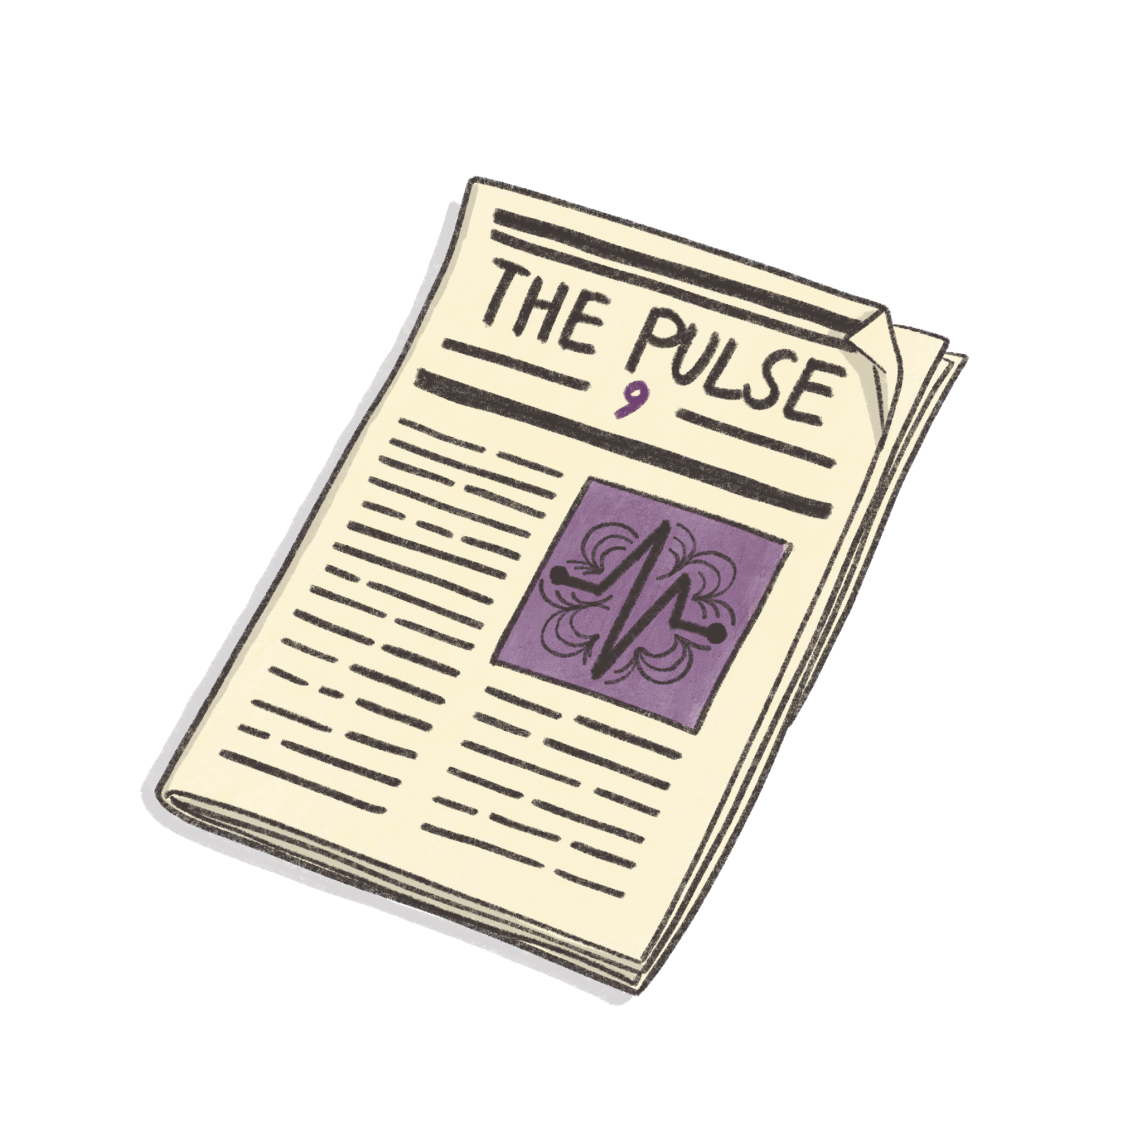 The Apoio Pulse – Issue Nine image